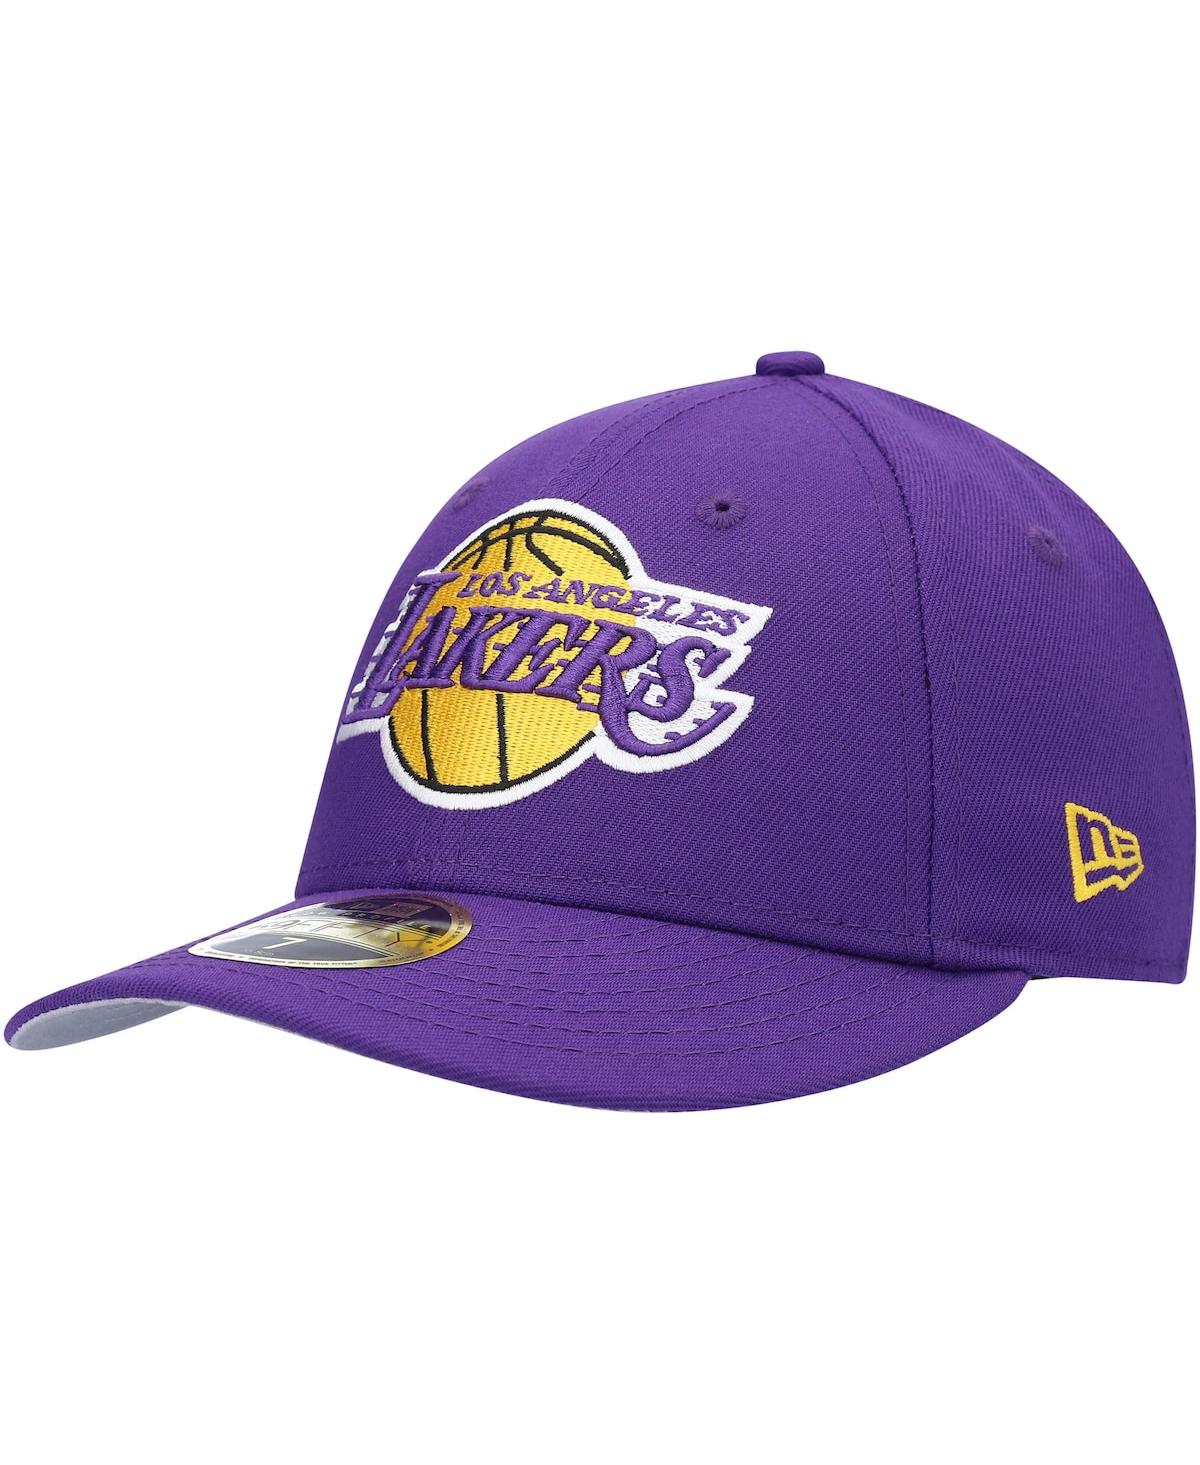 Men's New Era Purple Los Angeles Lakers Team Low Profile 59Fifty Fitted Hat - Purple